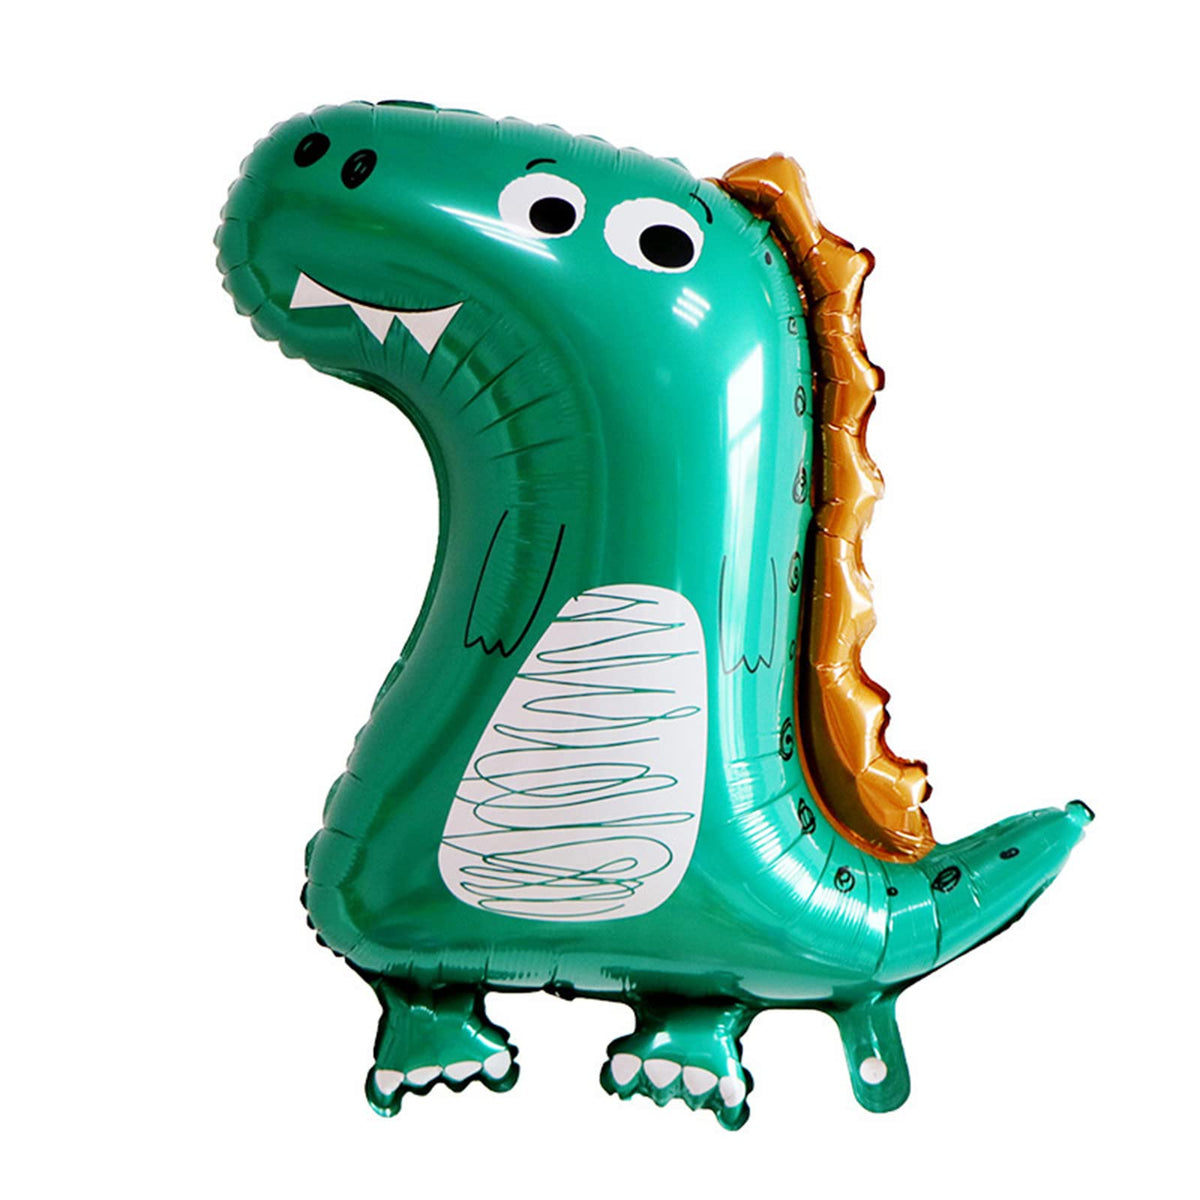 Yiwu PaiJing Import & Export Co., Ltd Balloons Dino Supershape Foil Balloon, 28 Inches 810077657300